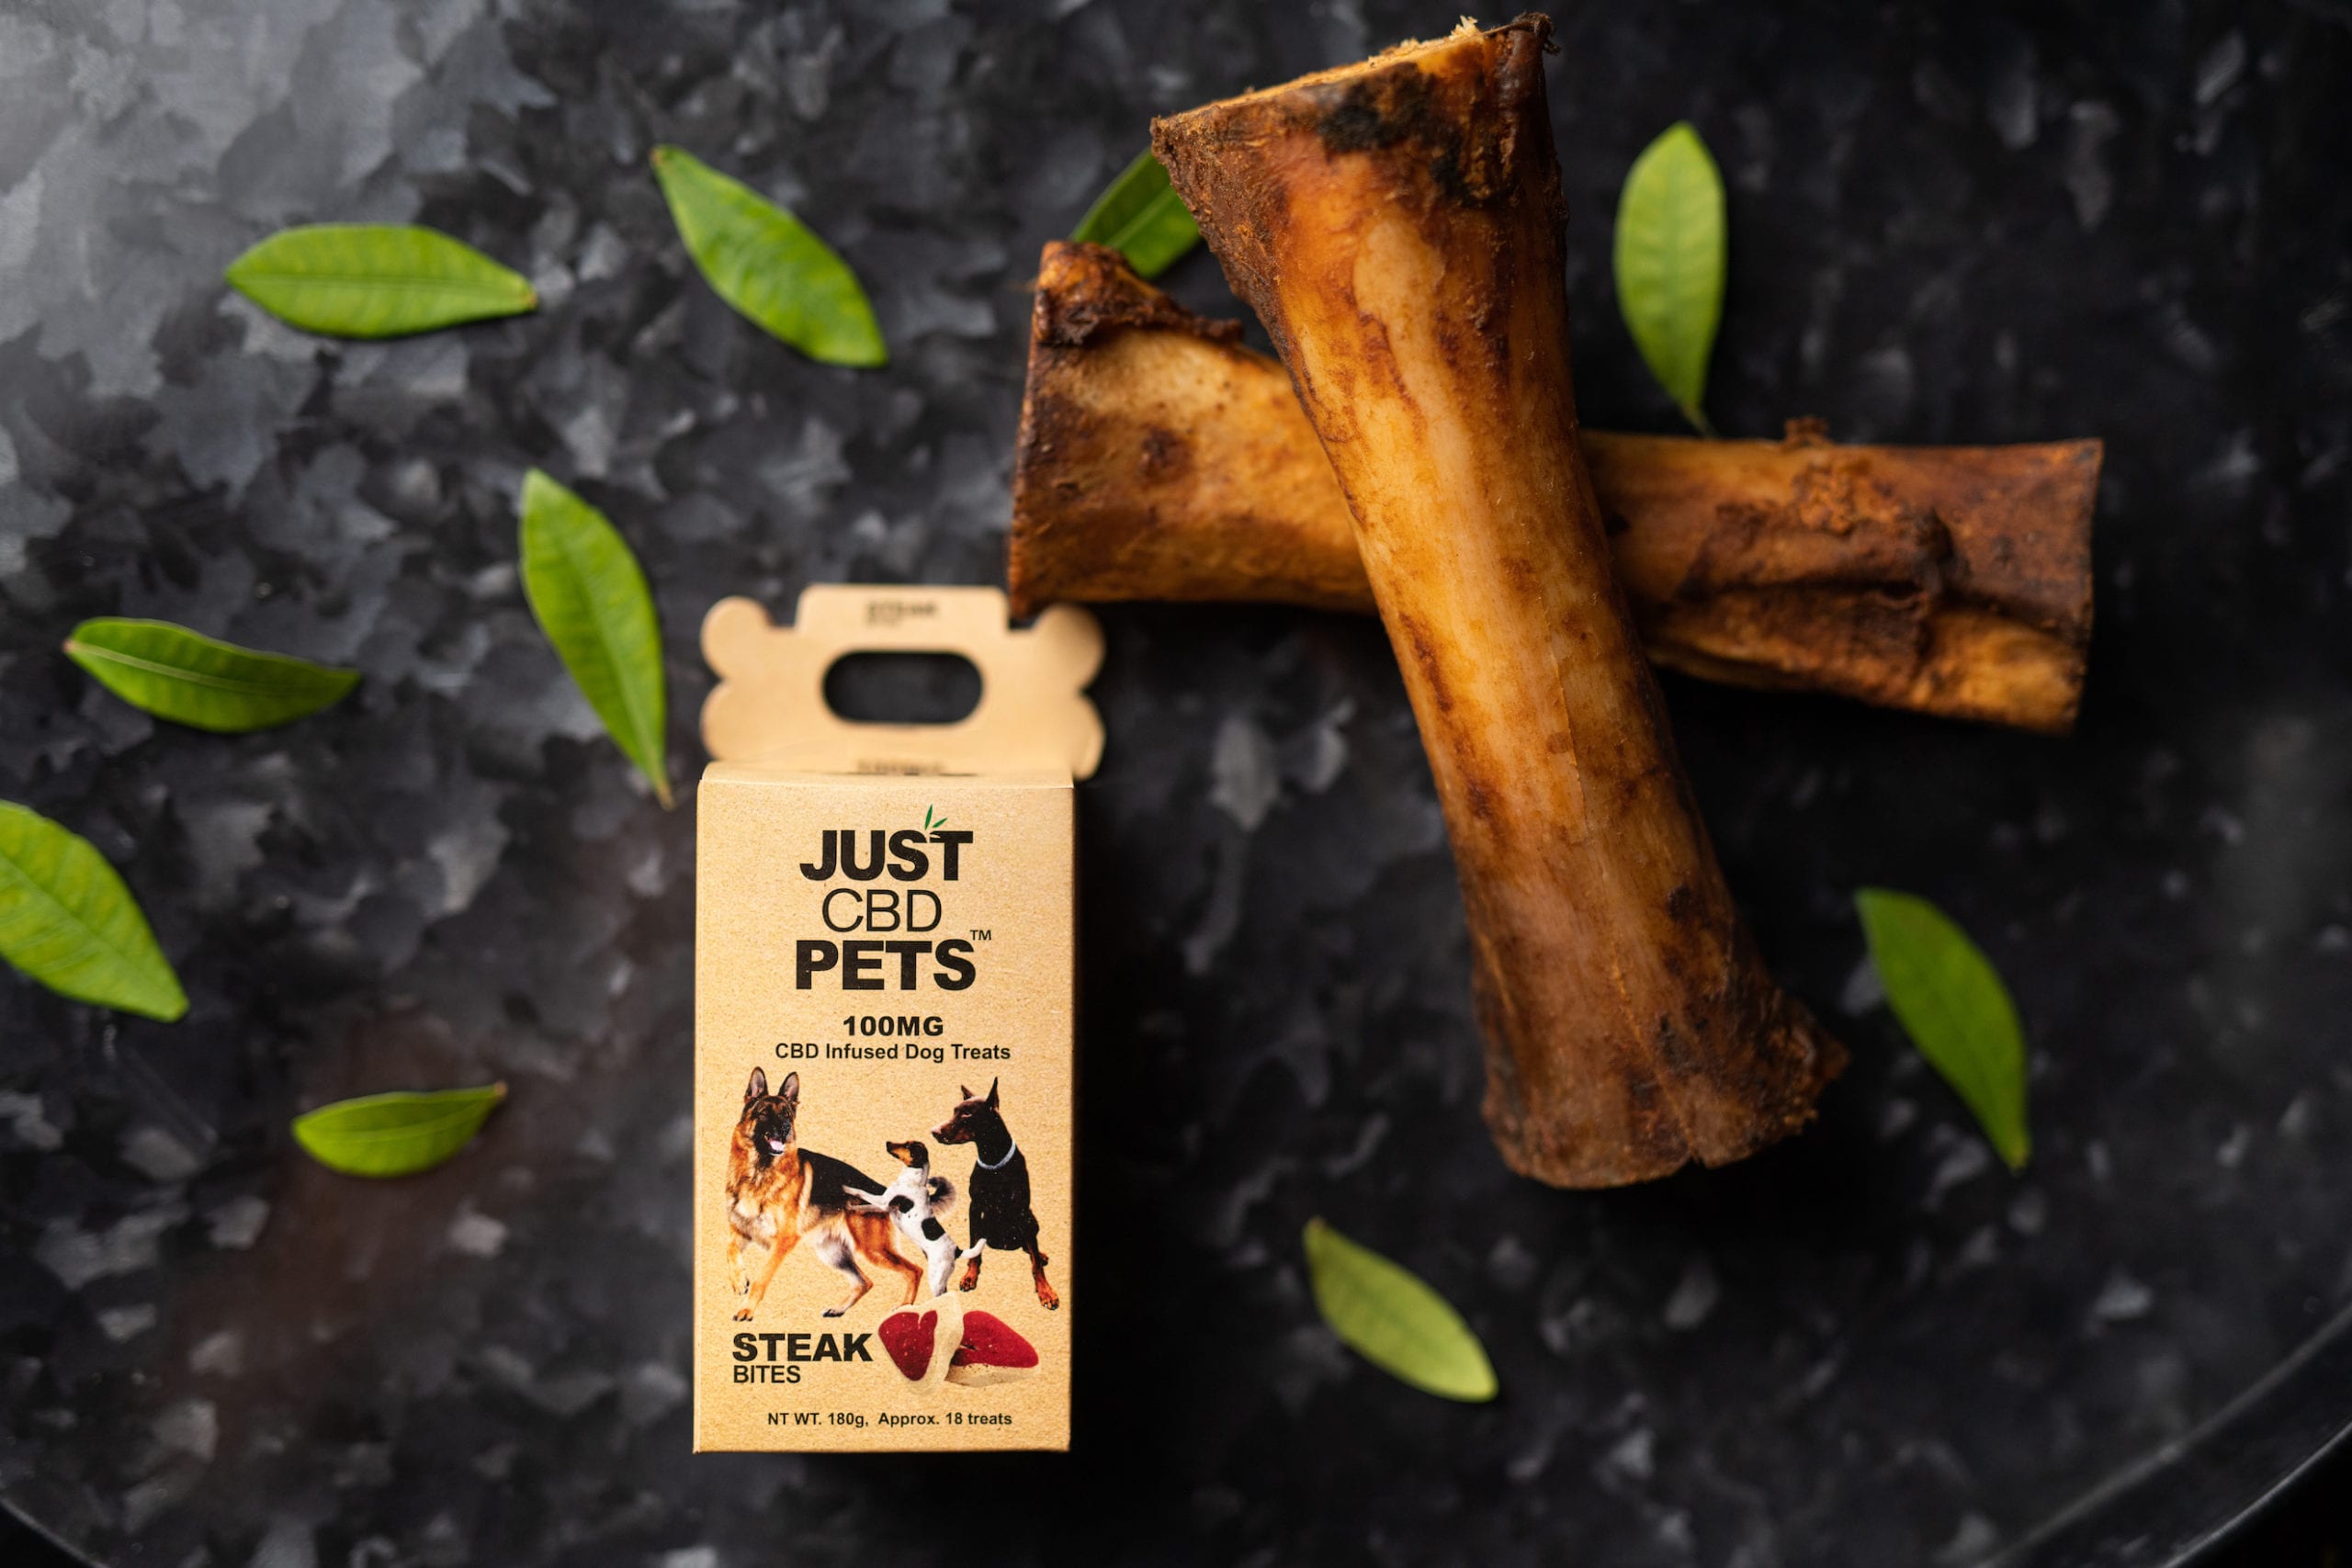 JustCBD Product Photography and Just CBD Products Steak bites pet treats with two bone marrows nearby